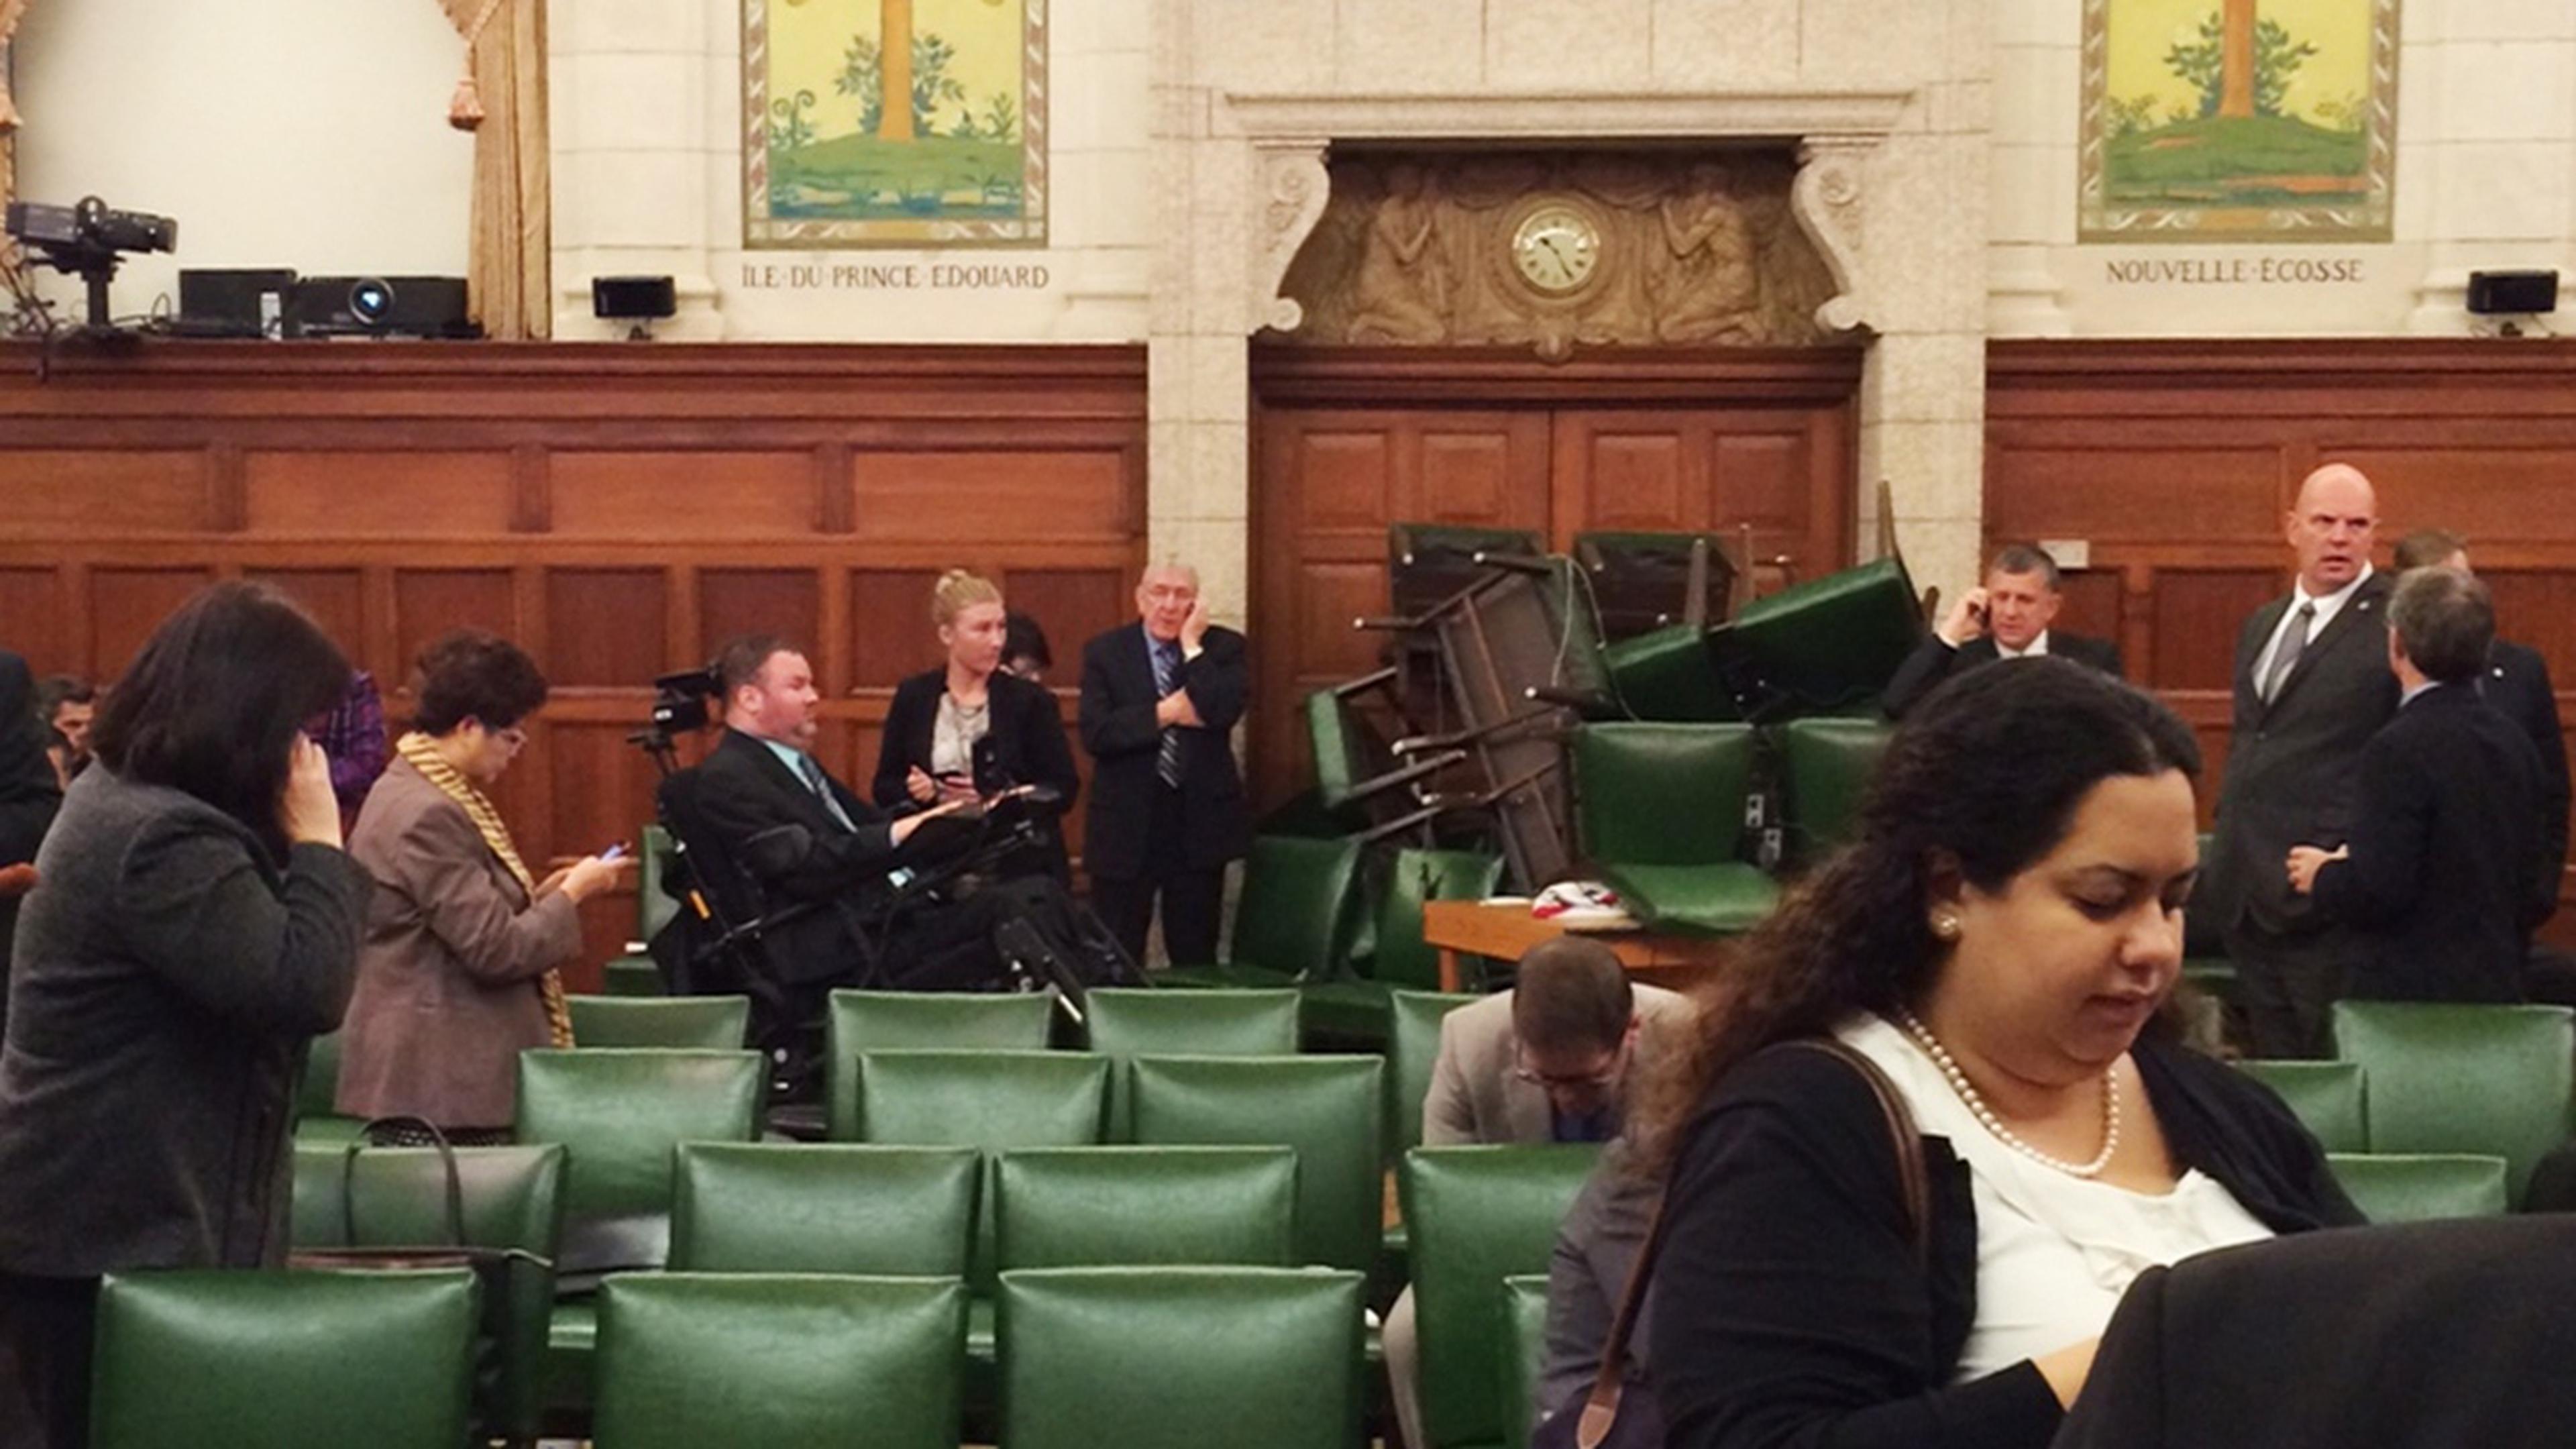 The Conservative Party caucus room is shown shortly after shooting began on Parliament Hill, in Ottawa, Ontario, October 22, 2014, taken and provided by MP Nina Grewal. Ottawa police are looking for multiple suspects in the shooting incidents on Wednesday near the Canadian war memorial and nearby Parliament Hill, a spokesman said. REUTERS/MP Nina Grewal/Handout  (CANADA - Tags: POLITICS CRIME LAW CIVIL UNREST) FOR EDITORIAL USE ONLY. NOT FOR SALE FOR MARKETING OR ADVERTISING CAMPAIGNS. THIS IMAGE HAS BEEN SUPPLIED BY A THIRD PARTY. IT IS DISTRIBUTED, EXACTLY AS RECEIVED BY REUTERS, AS A SERVICE TO CLIENTS